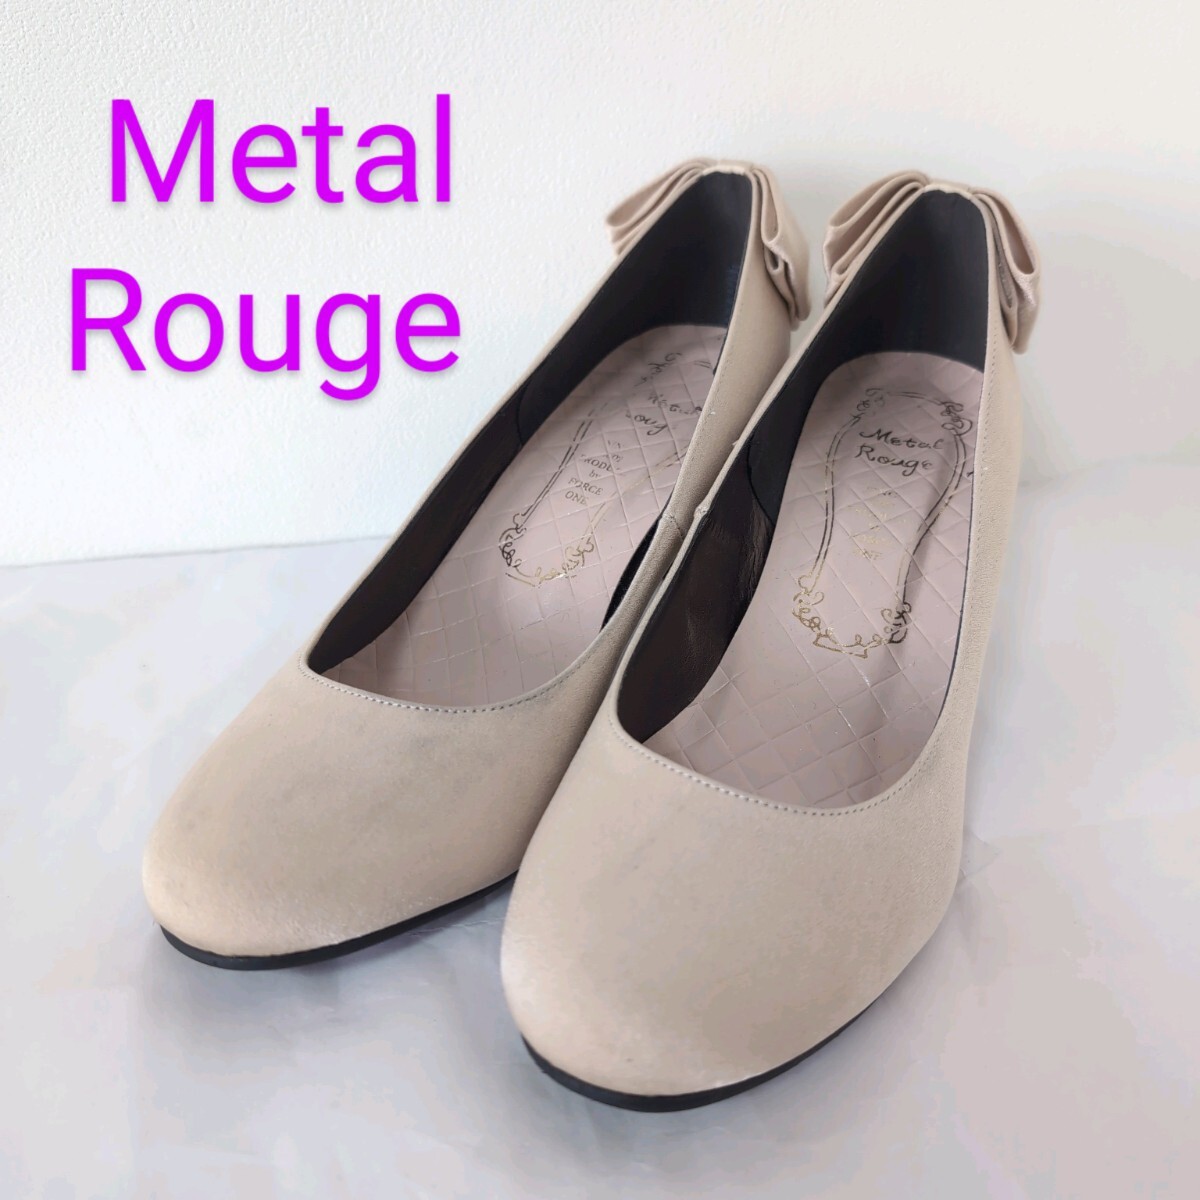 MO# unused # metal rouge pumps back ribbon charm attaching lady's 24cm heel height 6.5cm beige corn heel party 